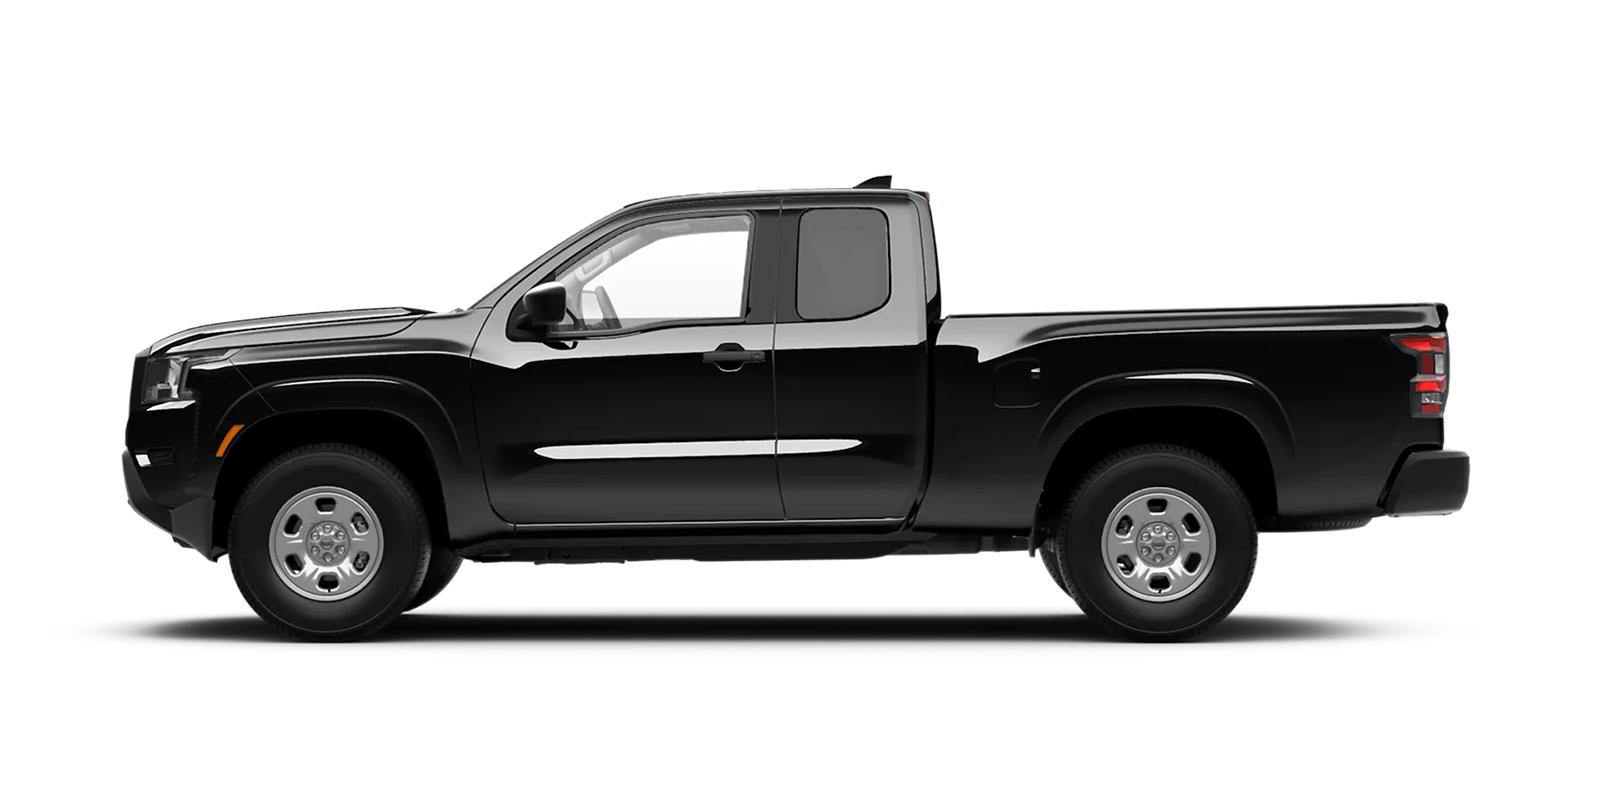 2022 Frontier King Cab S 4x2 in Super Black | Neil Huffman Nissan of Frankfort in Frankfort KY